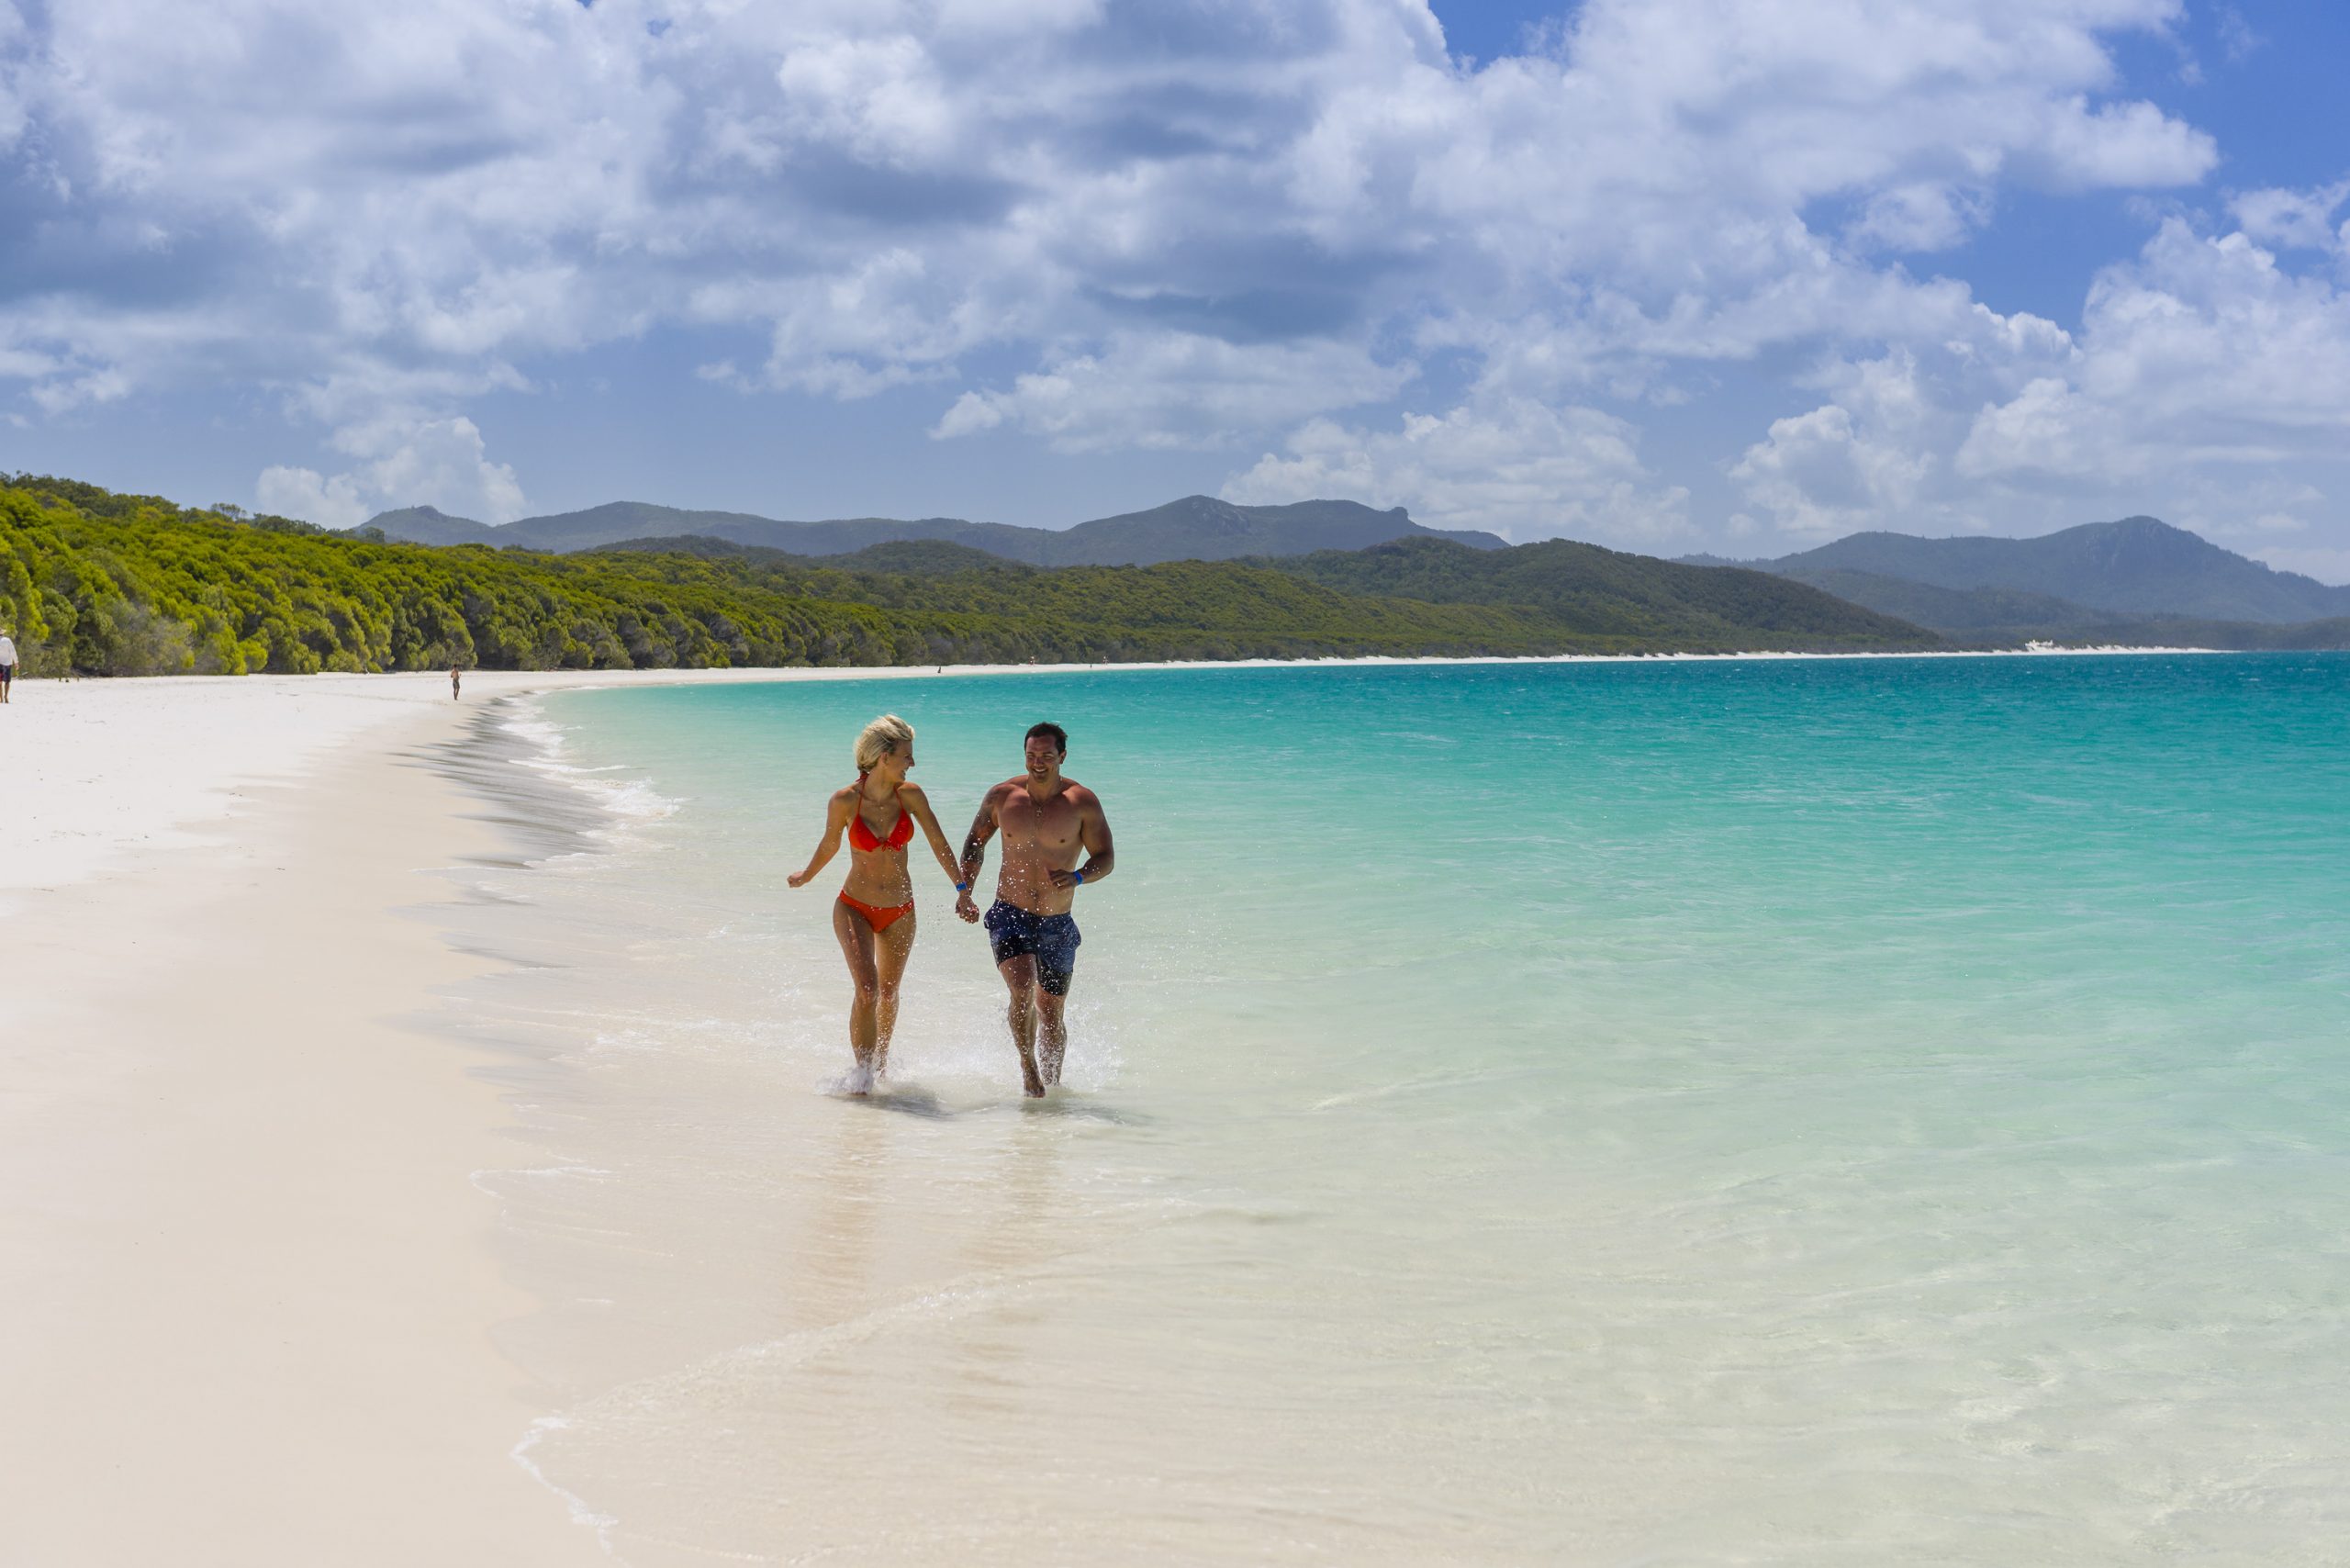 Why is Whitehaven Beach the place to go?